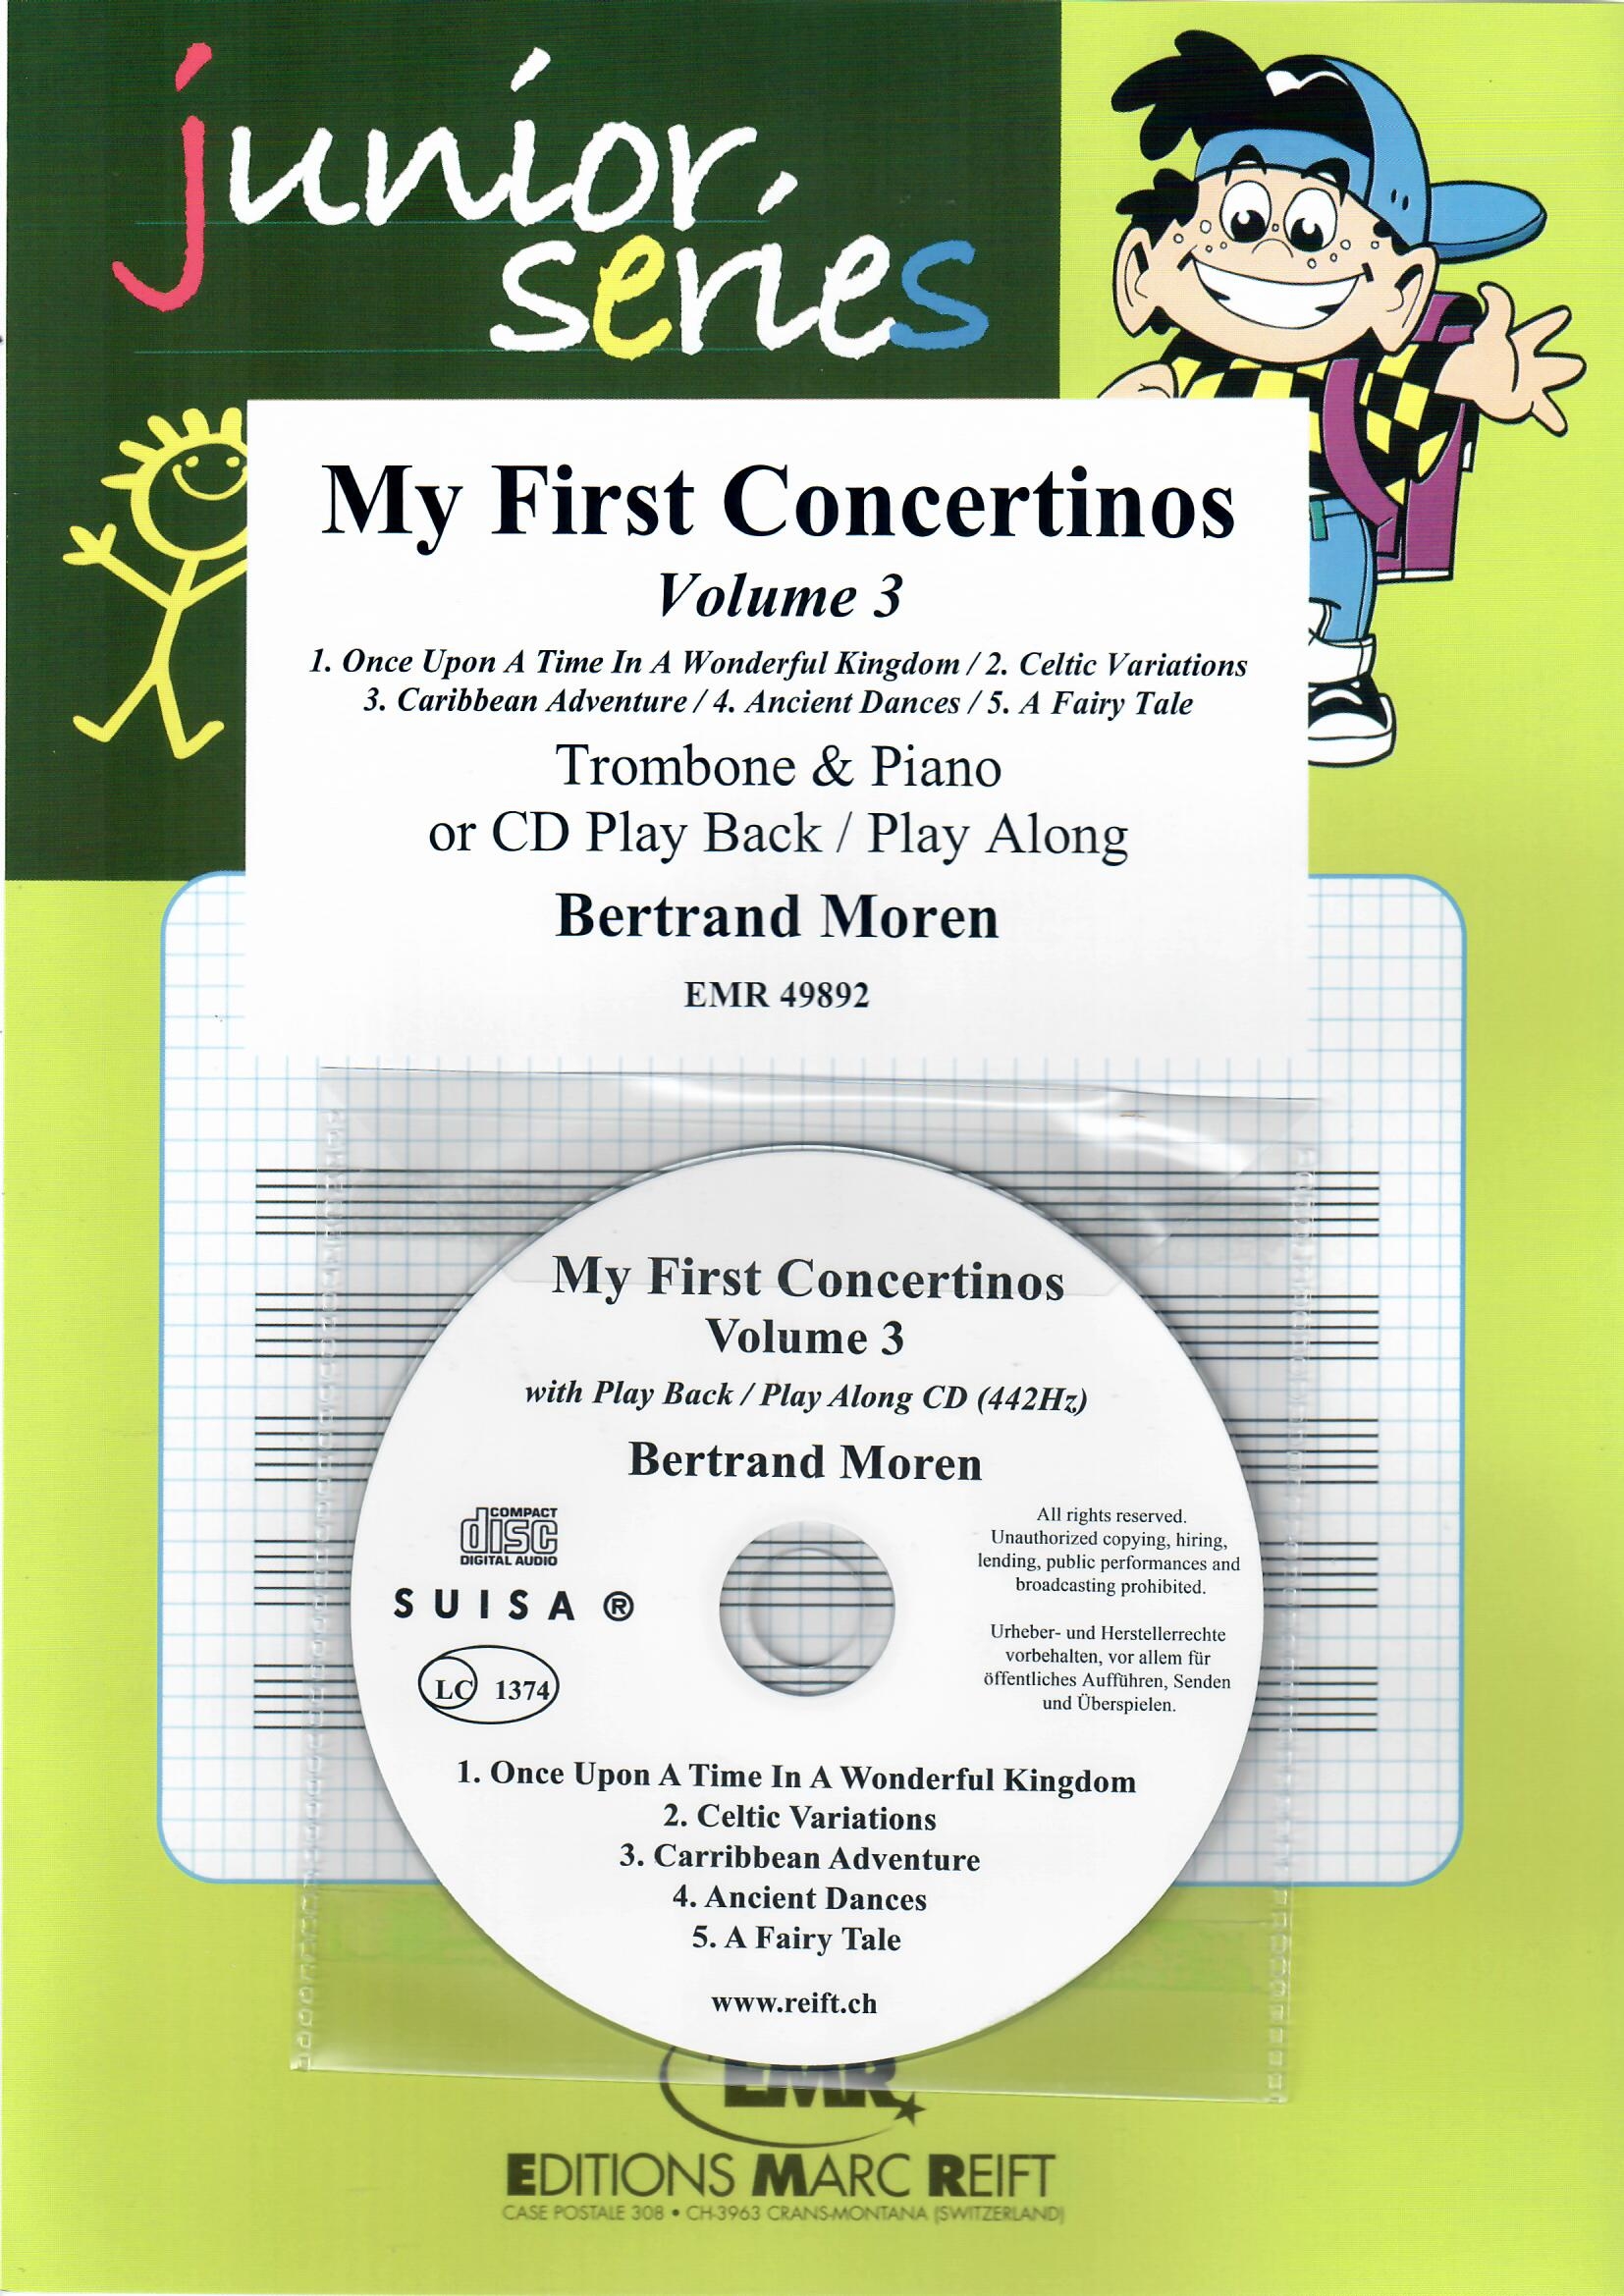 MY FIRST CONCERTINOS VOLUME 3 - Trombone & CD, BOOKS with CD Accomp., SOLOS - Trombone